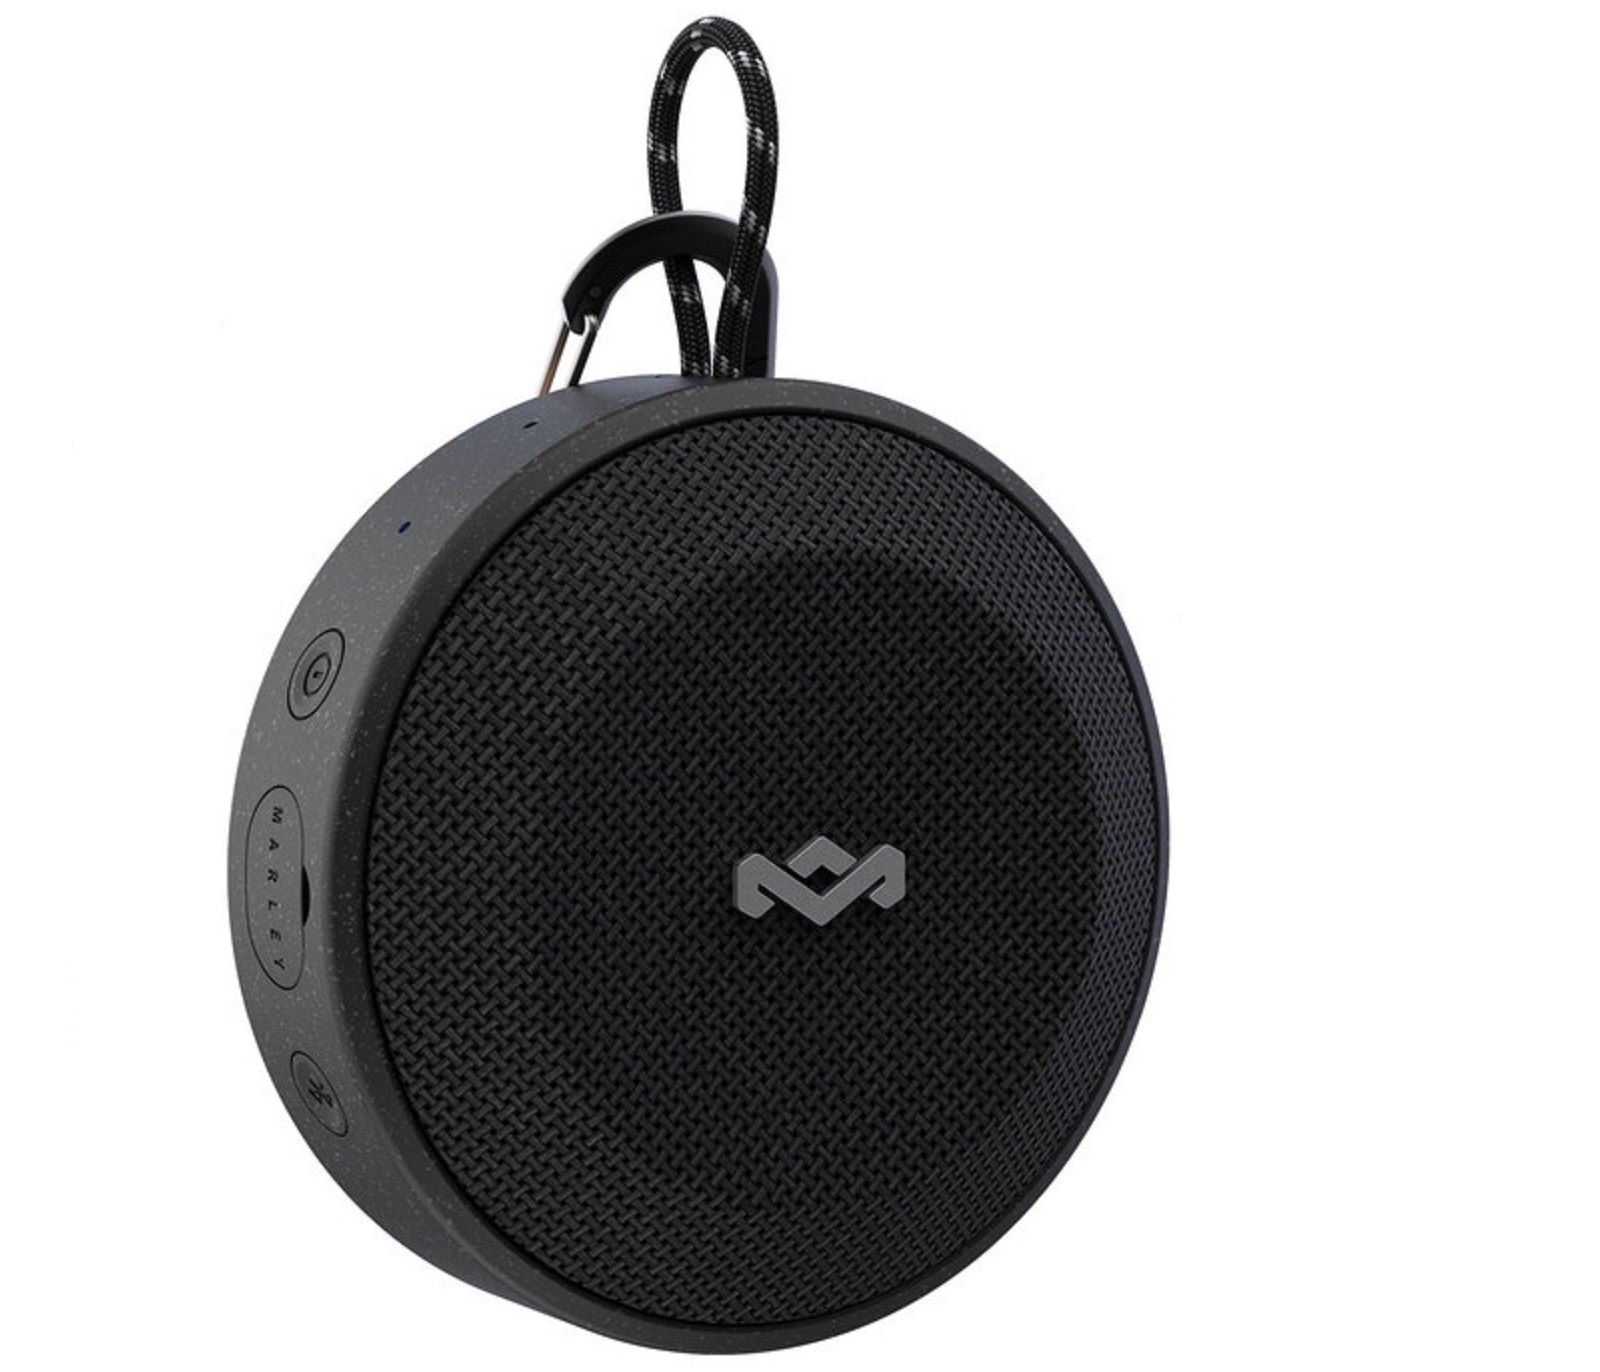 House Of Marley Announces Sustainable Audio Products Including Speakers Made Of Cork image 3